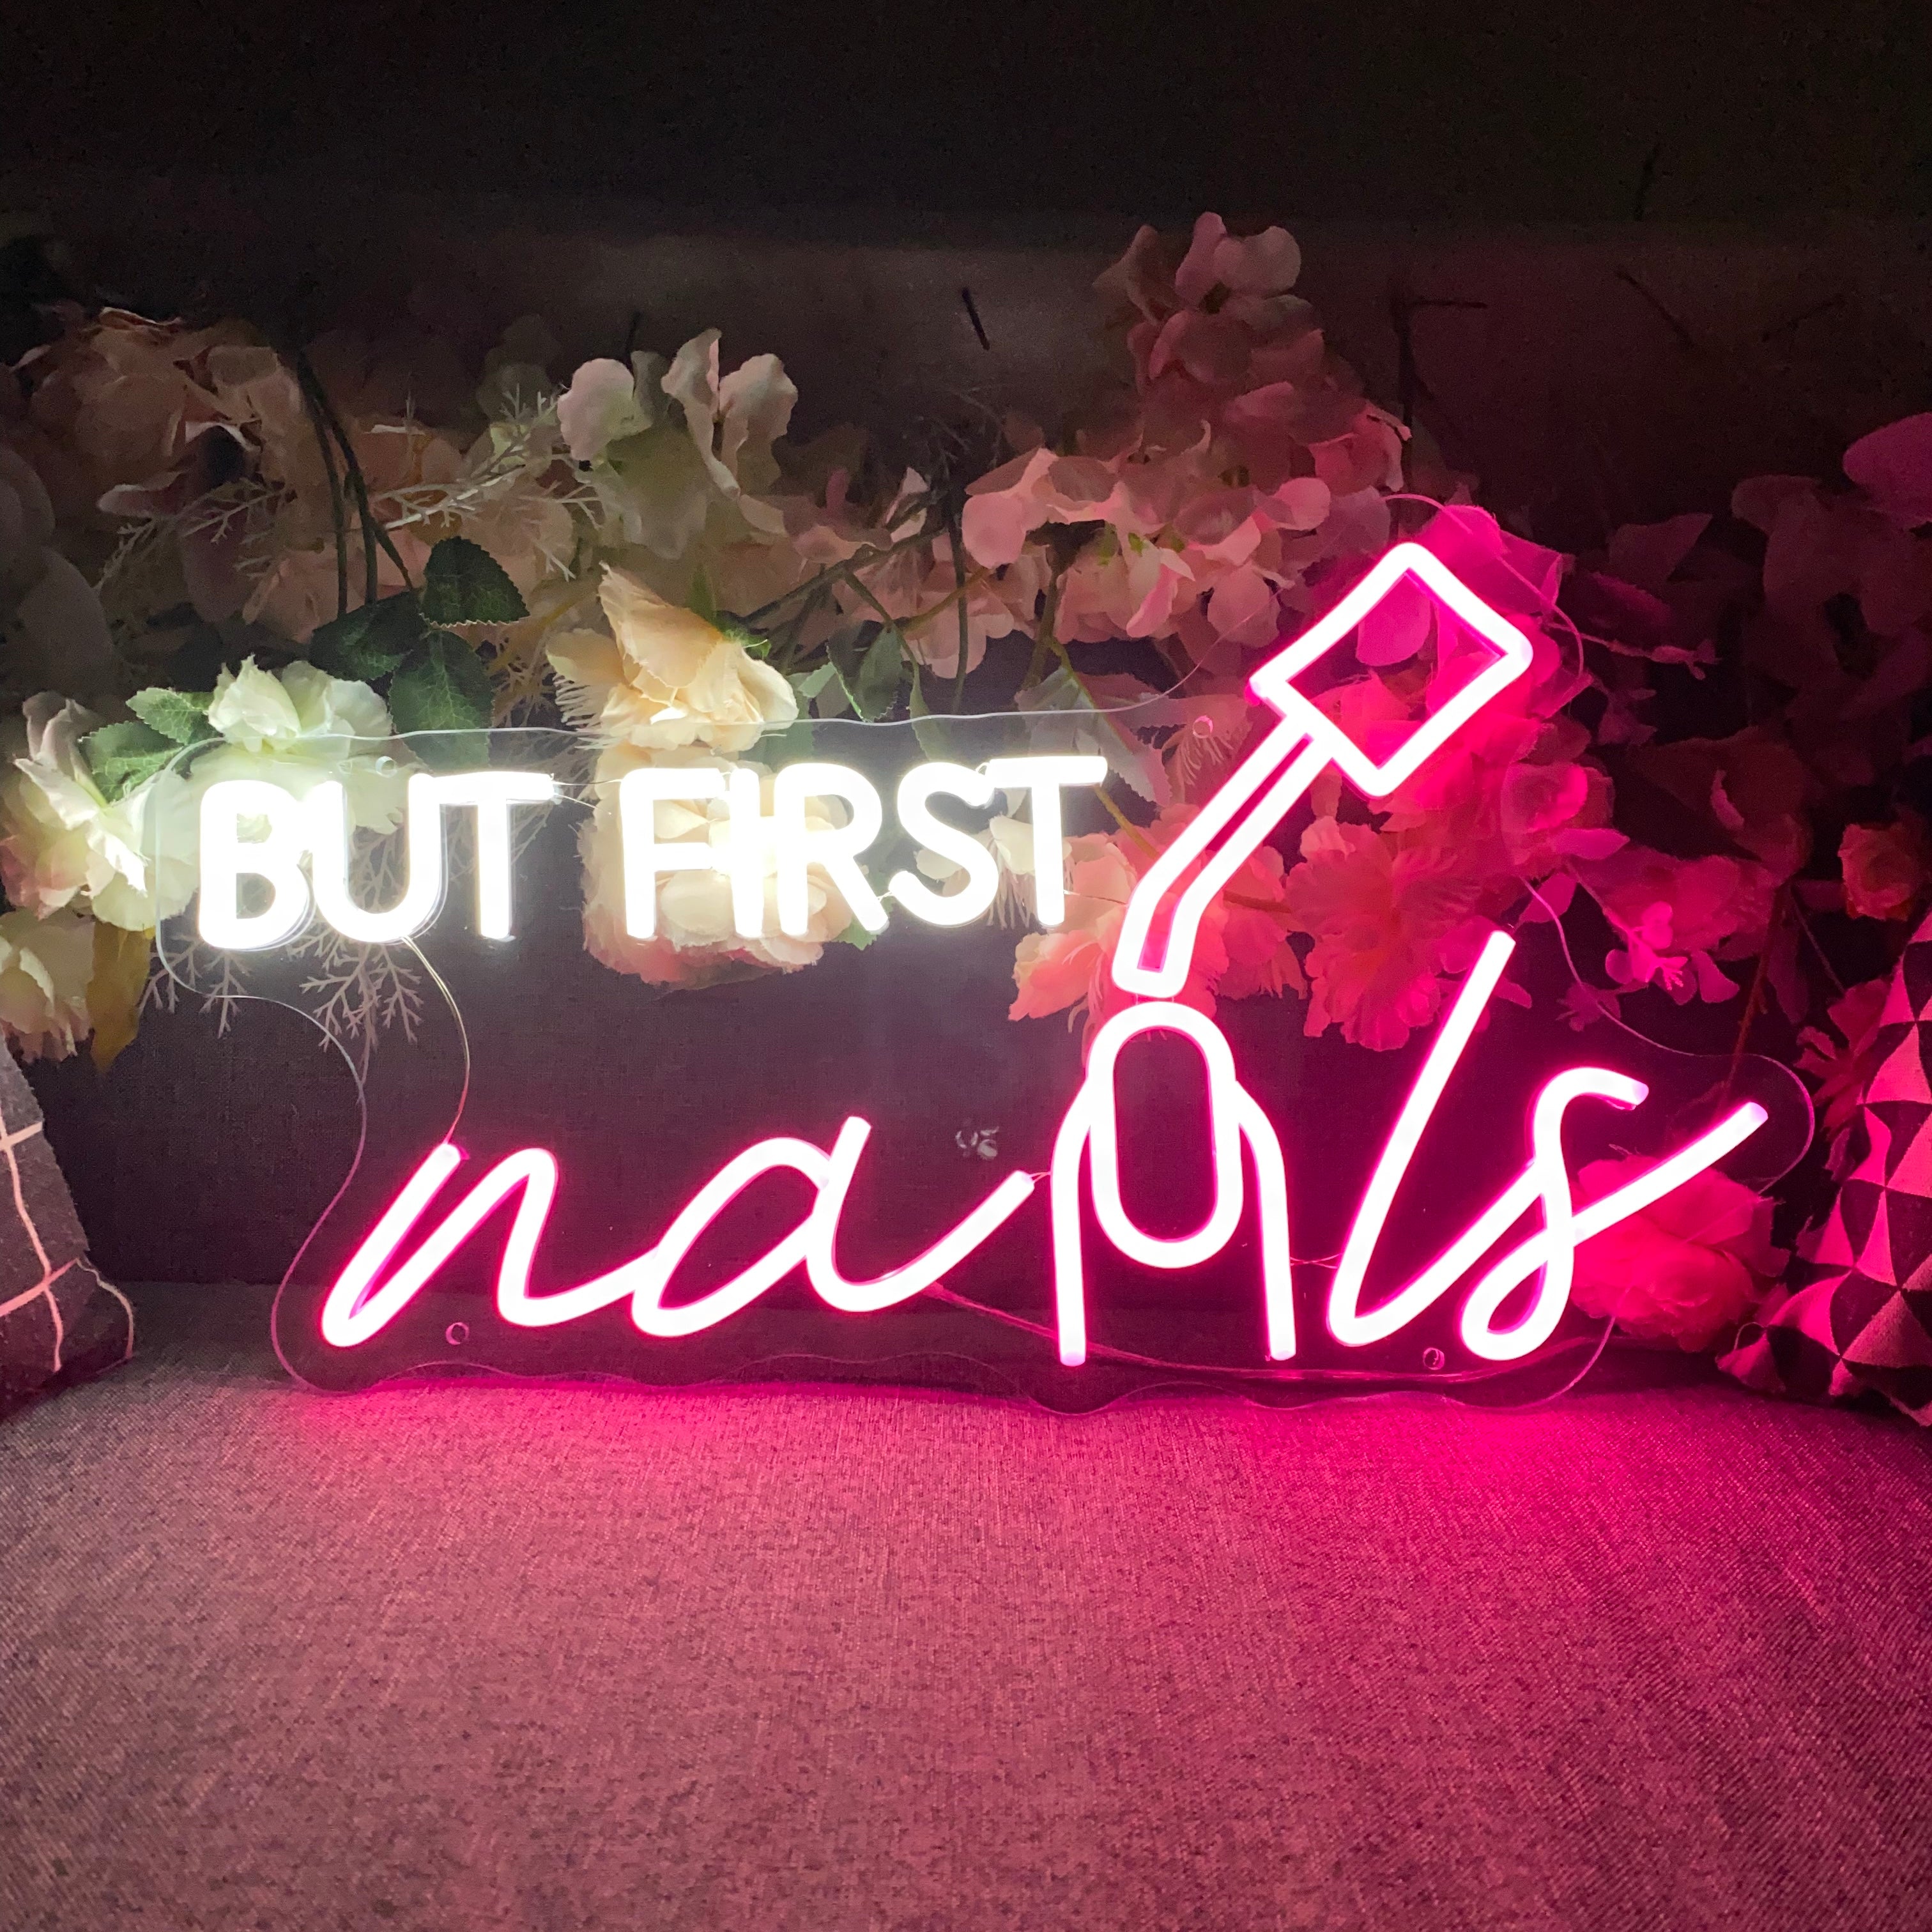 But First Nails LED Neon Light Fashionable & Personalized For Beauty Salon Decoration